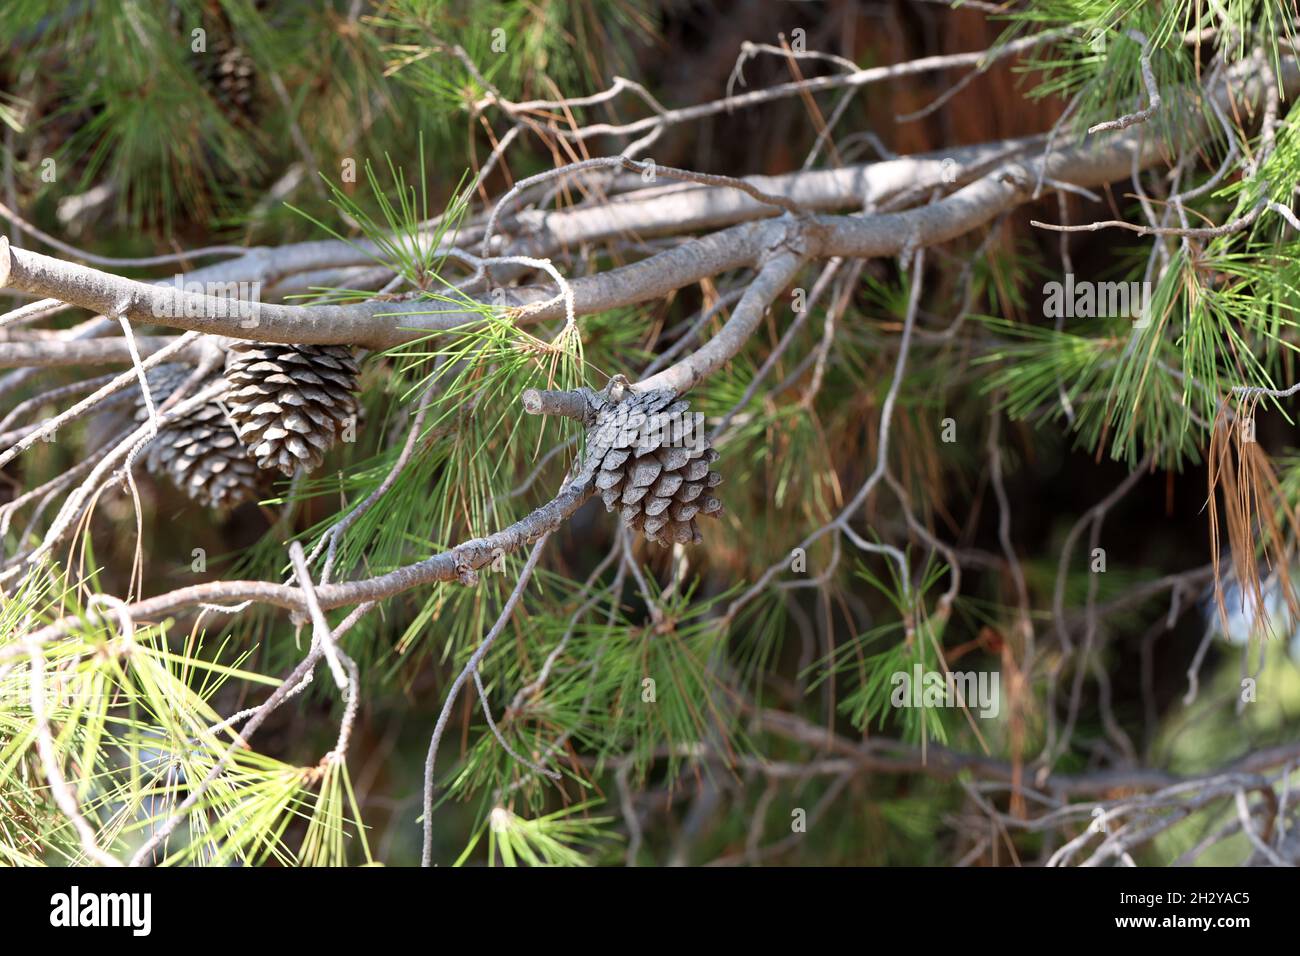 Pine branch with needles and old cones Stock Photo